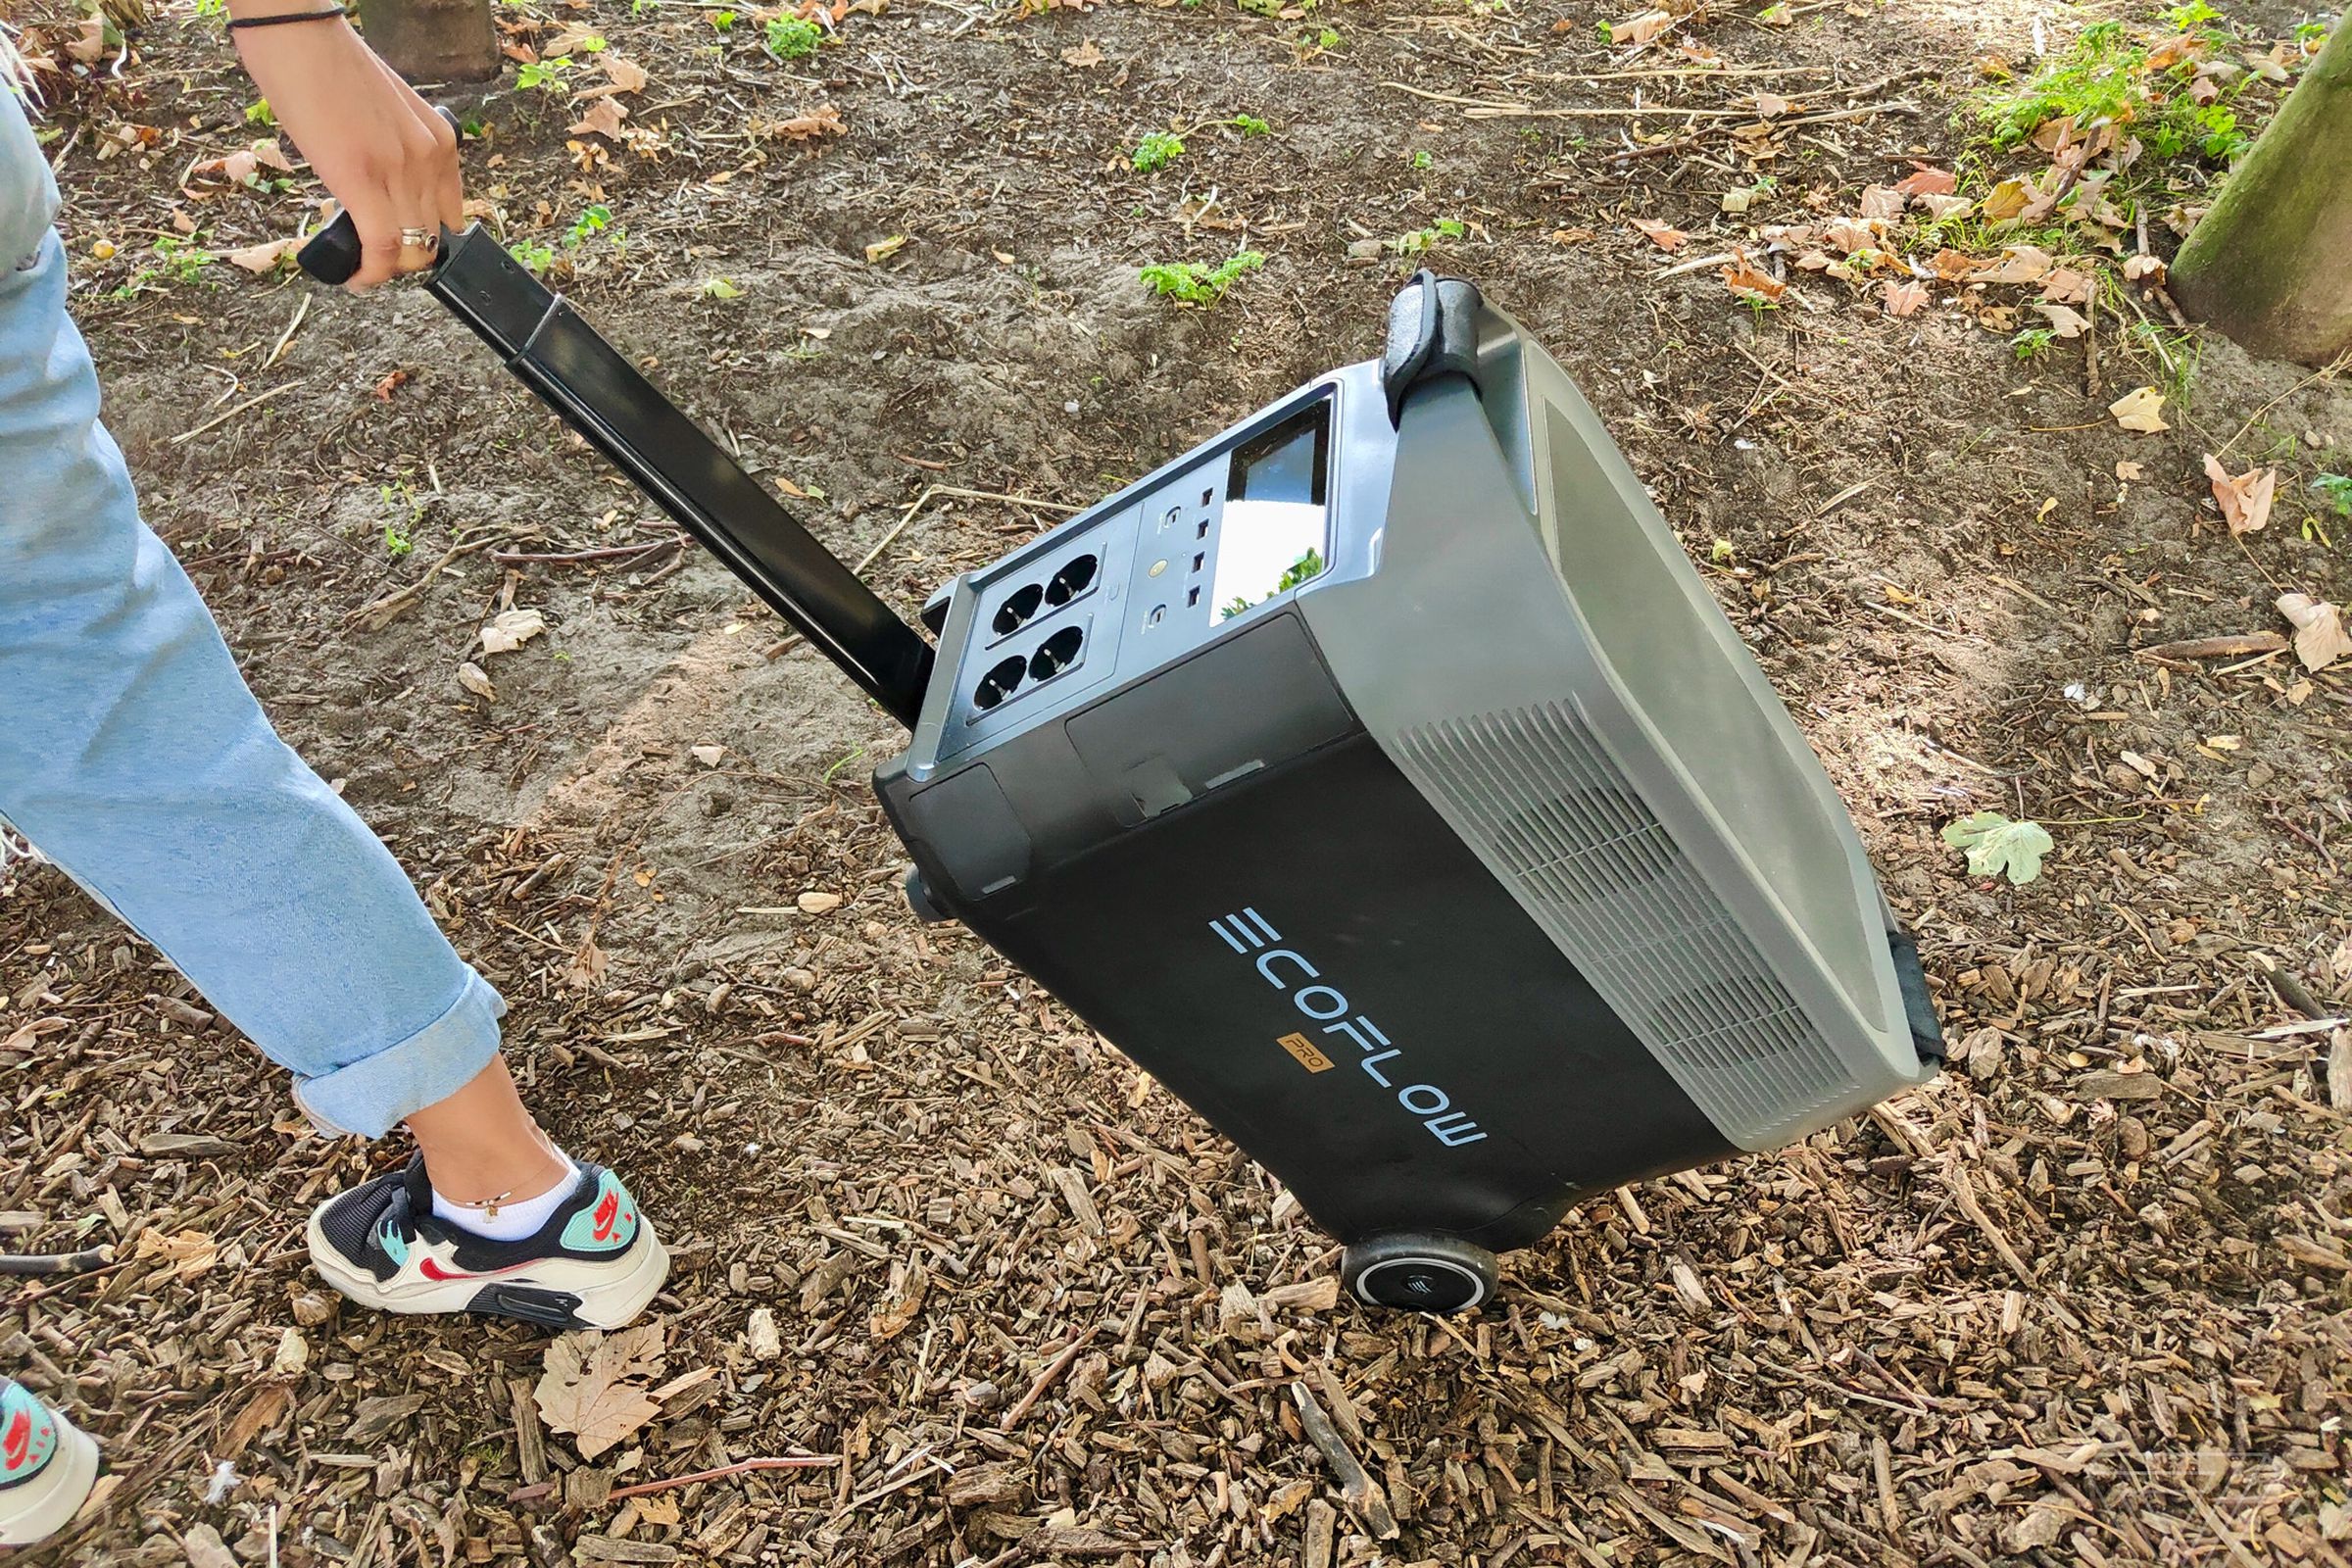 The Delta Pro weighs 100 pounds but is relatively portable.